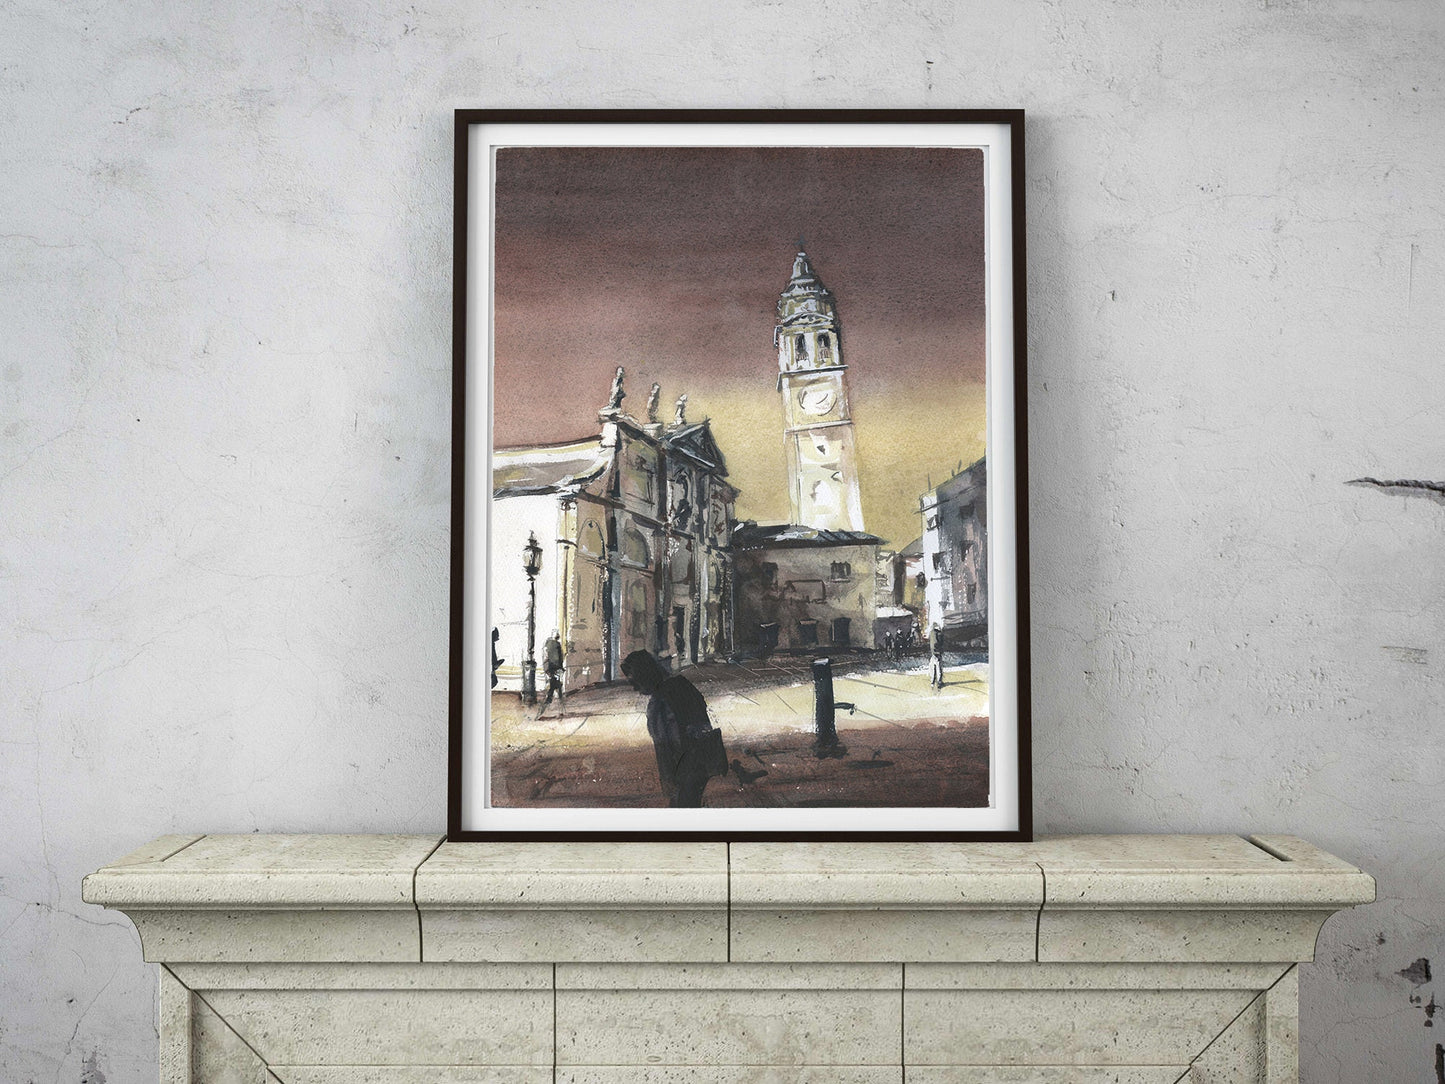 Venice, Italy leaning tower- watercolor painting. The leaning tower of Venice, Italy artwork church belltower watercolor art Venice painting